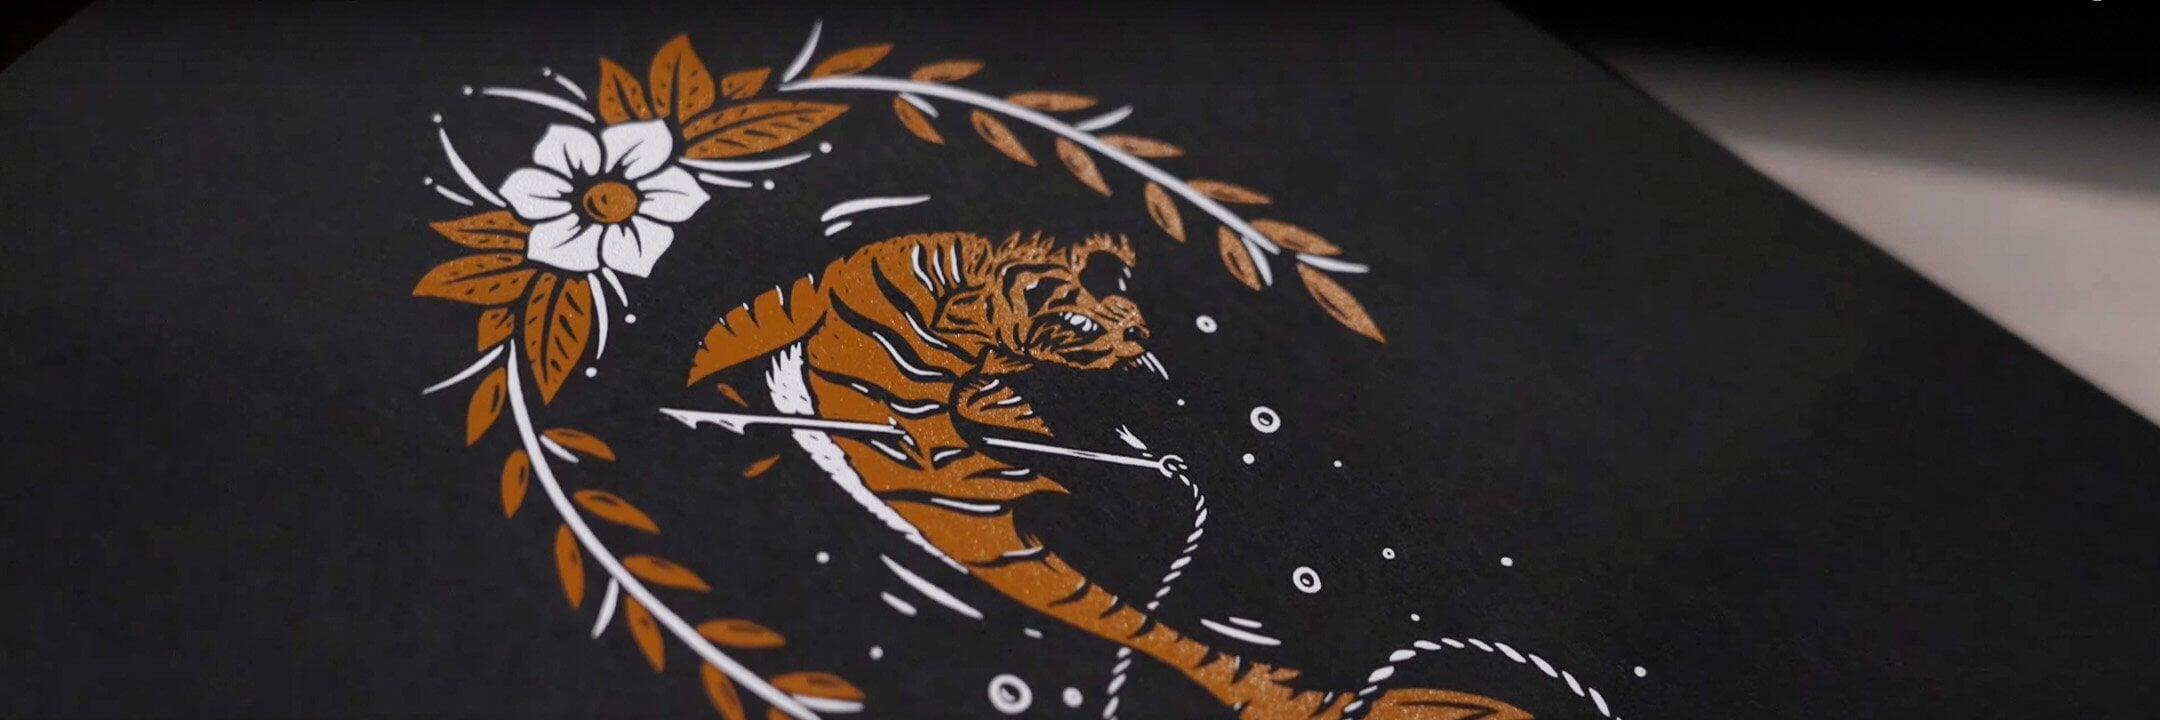 Everything You Need To Know About Screen Printing by Inkwell